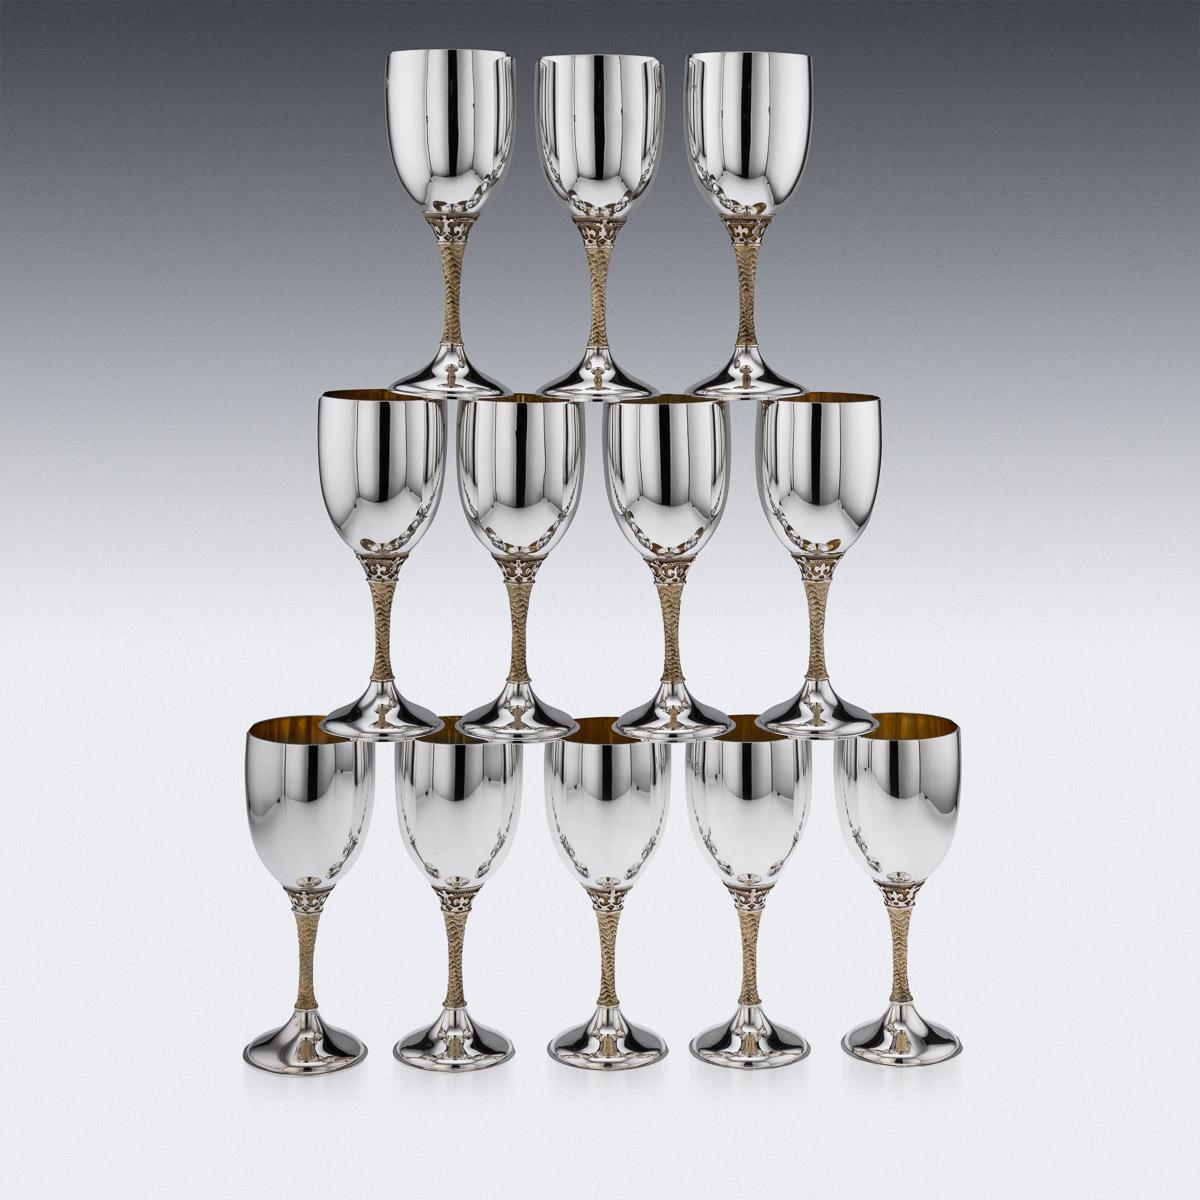 20th Century English silver set of 12 wine goblets, magnificent size and weight, in traditional form, the stems cast with very unusual wavy and textured decoration and richly gilt, the tops of the stems decorated with protruding Fleur-de-lis,